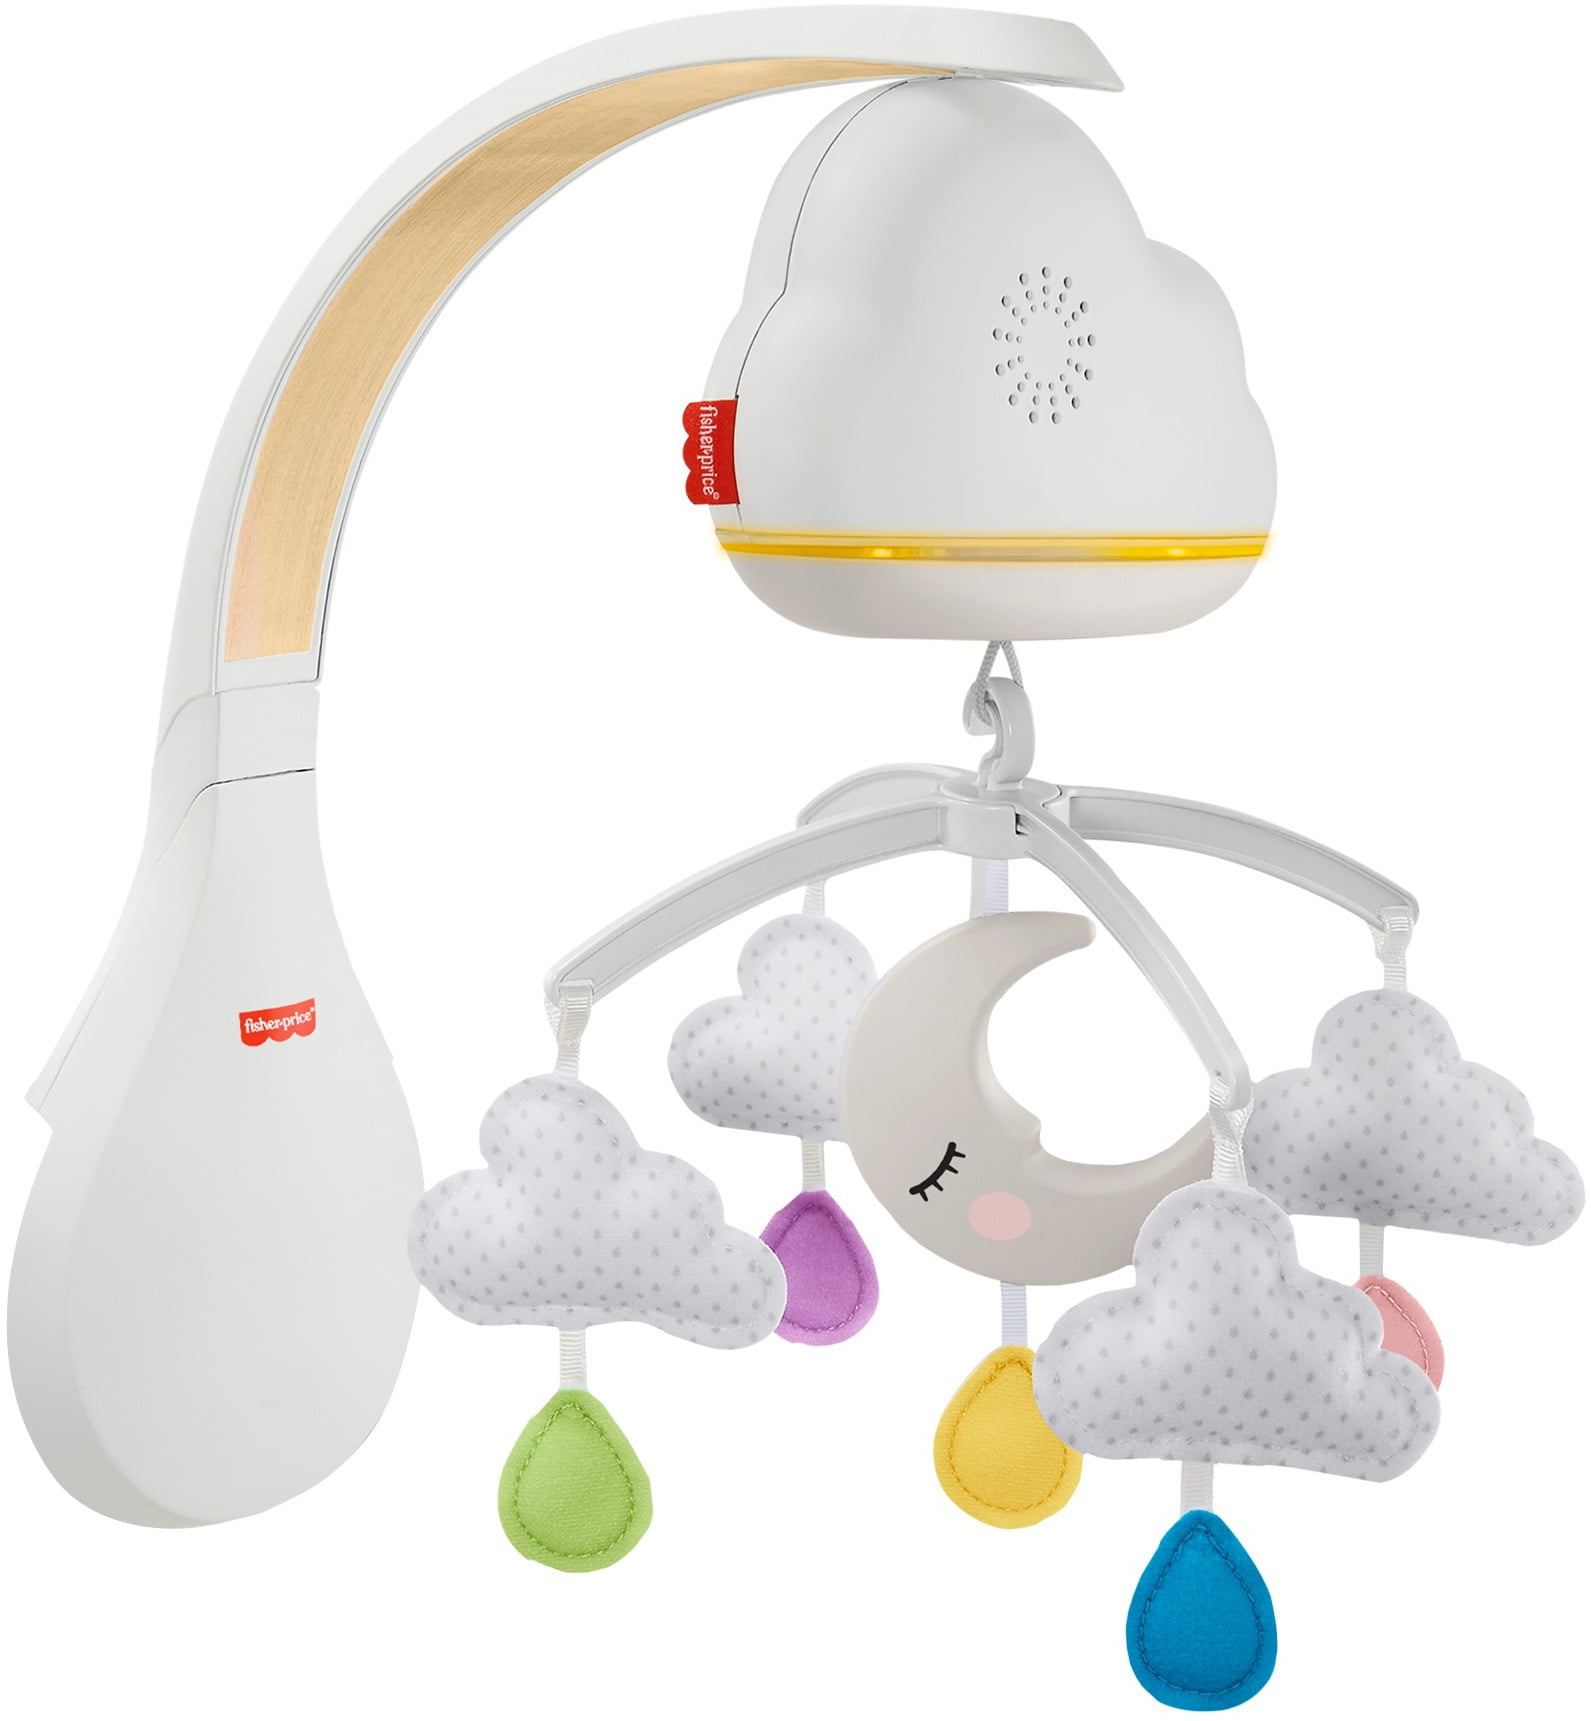 FisherPrice Calming Clouds Mobile and Soother, Crib Sound